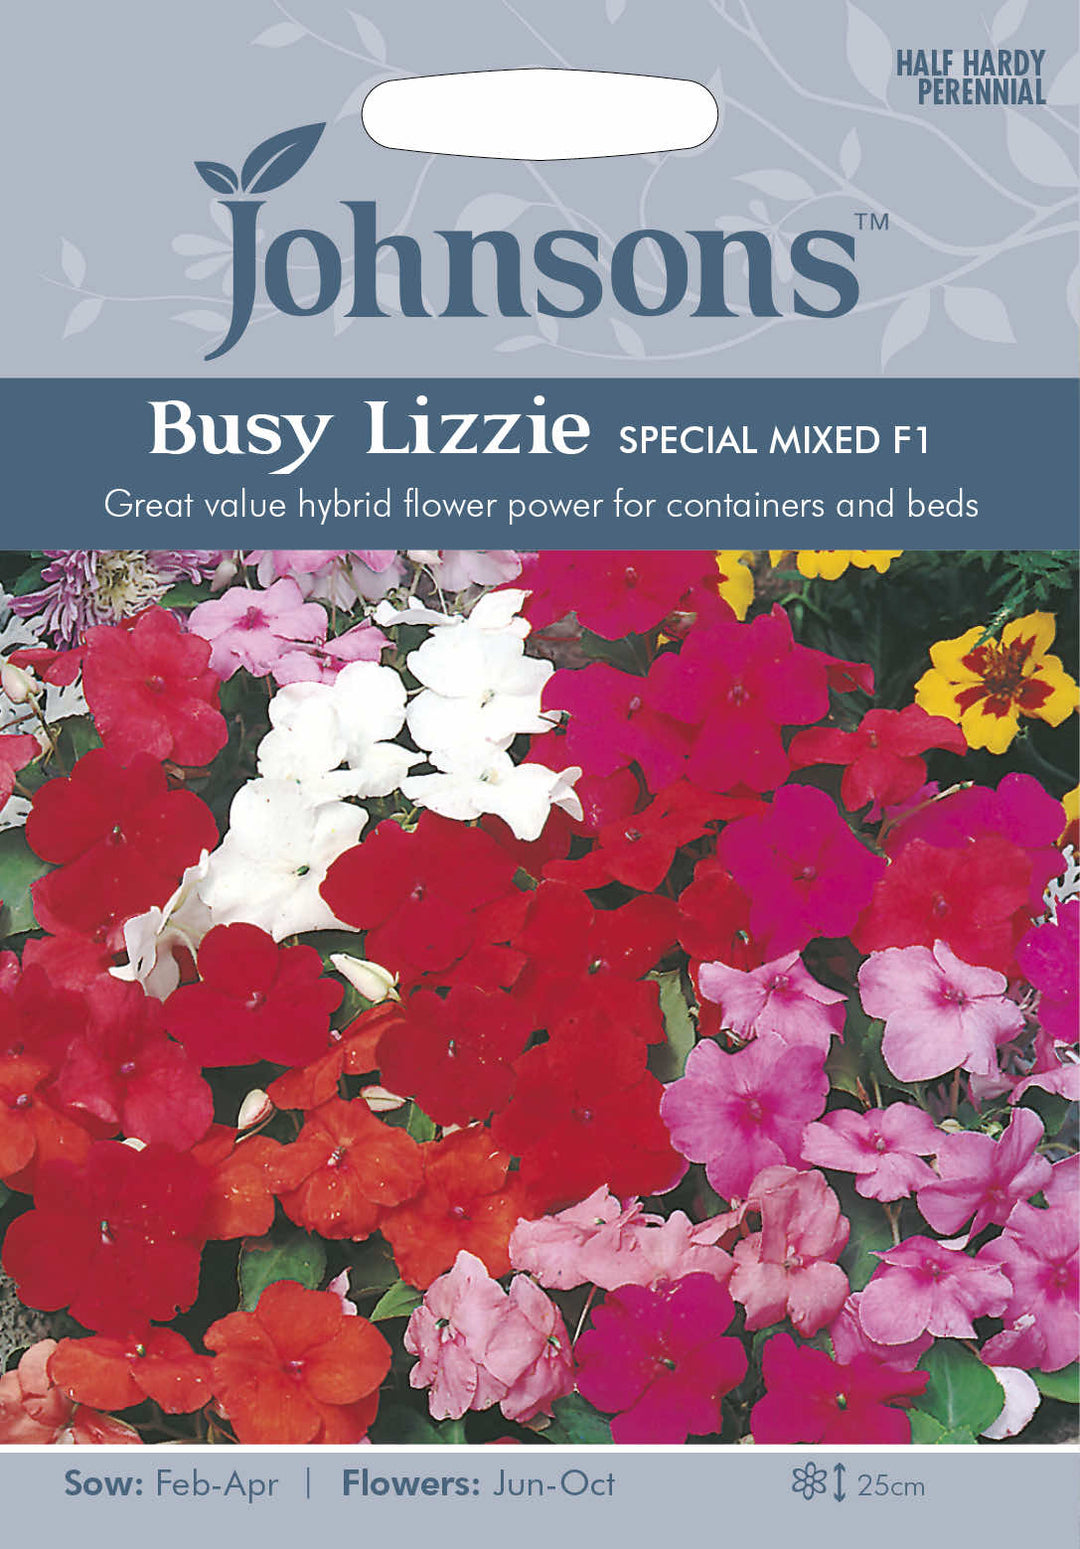 Johnsons BUSY LIZZIE Special Mixed F1 - LGC